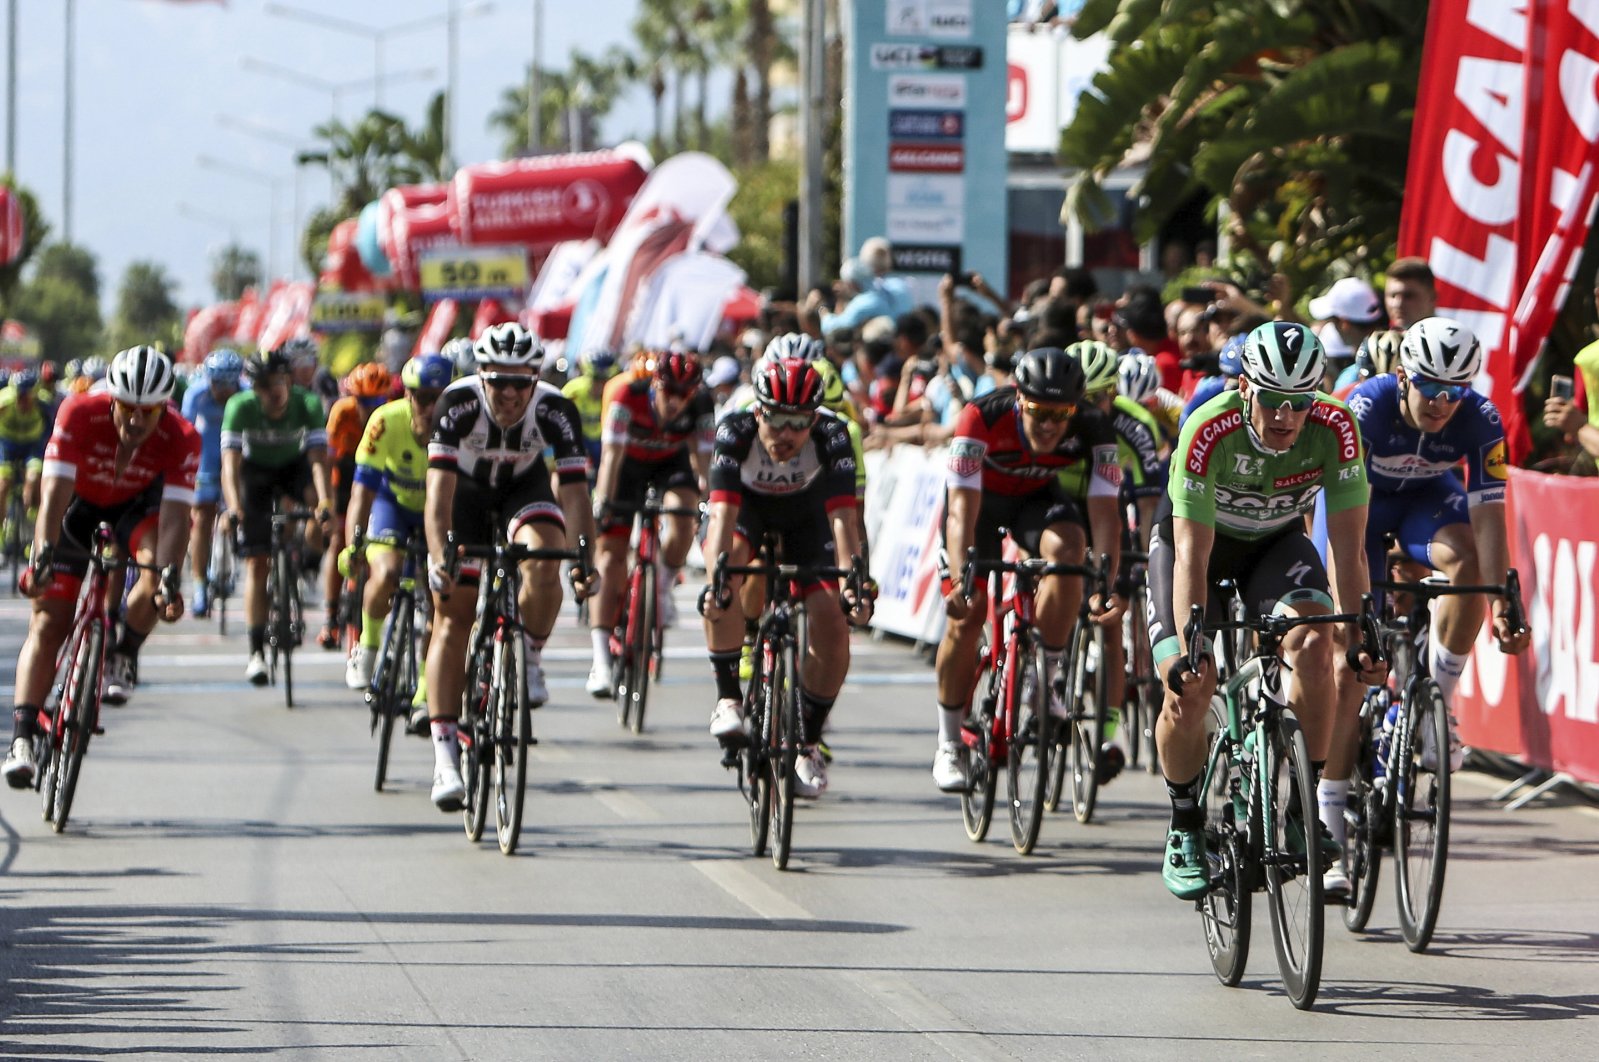 In this undated photo, cyclists compete in the Presidential Cycling Tour in Antalya, Turkey. (DHA Photo)